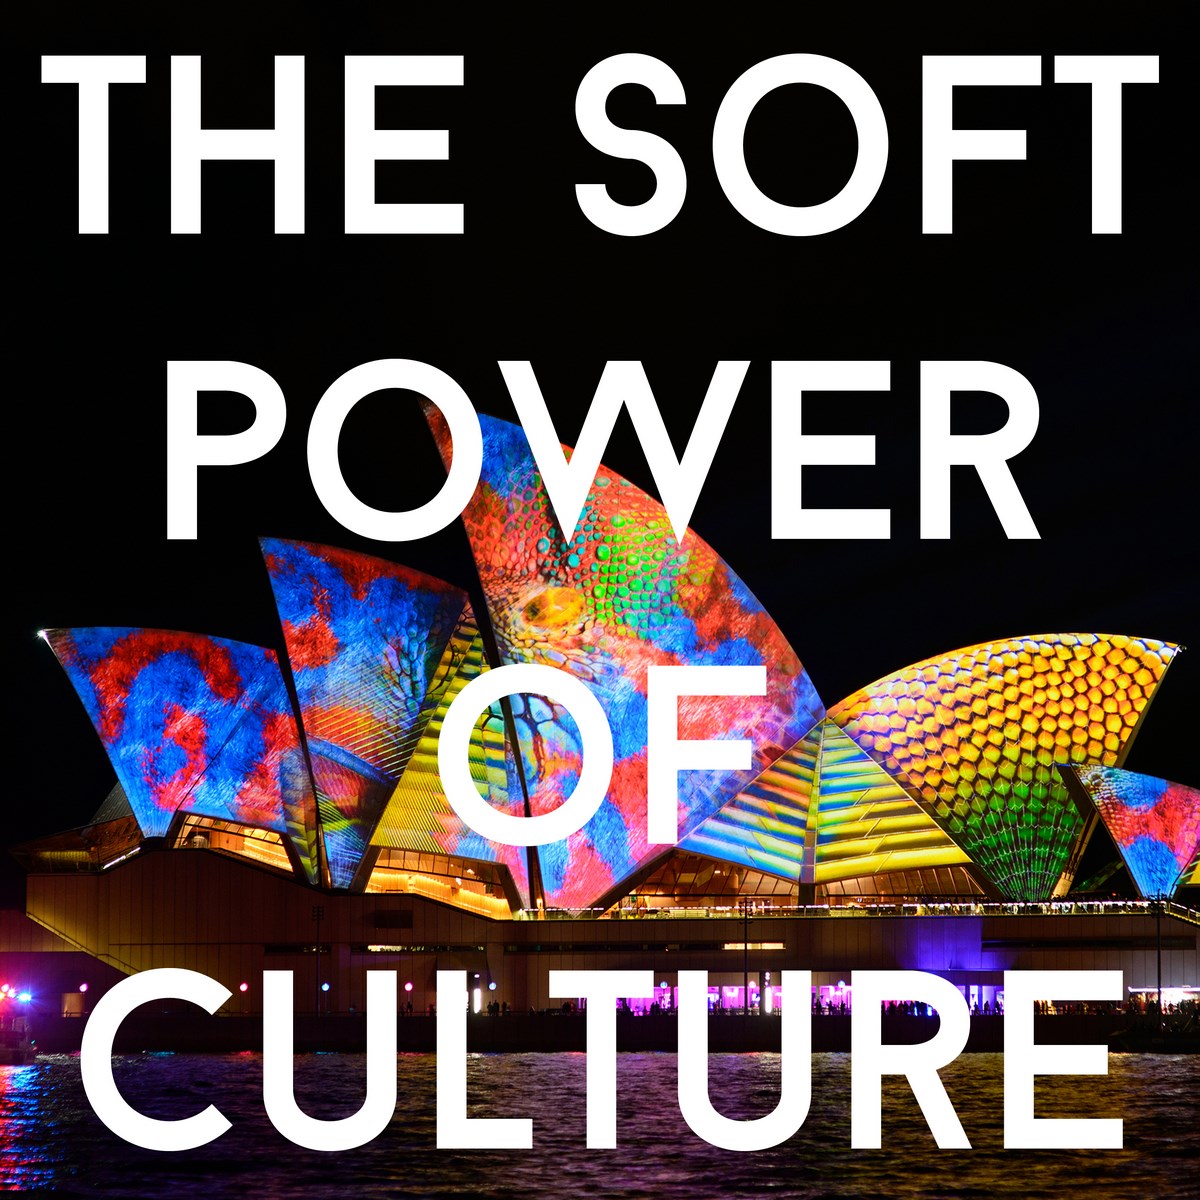 The Soft Power of Culture